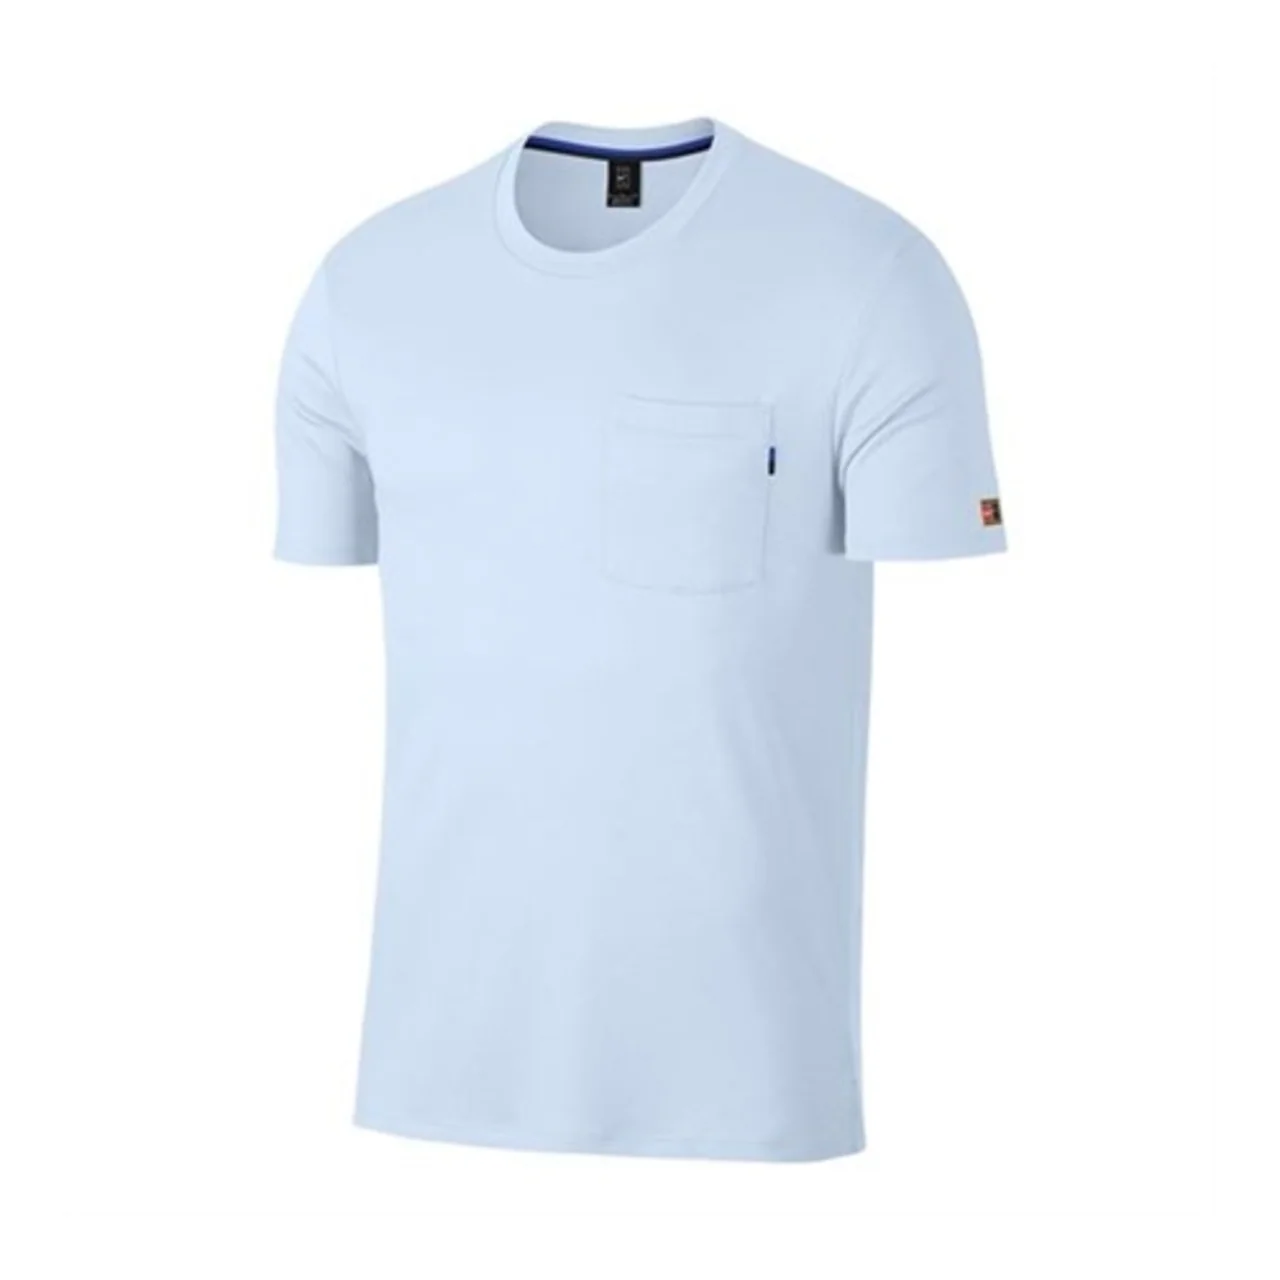 Nike SS Top Heritage Classic Tee Size S